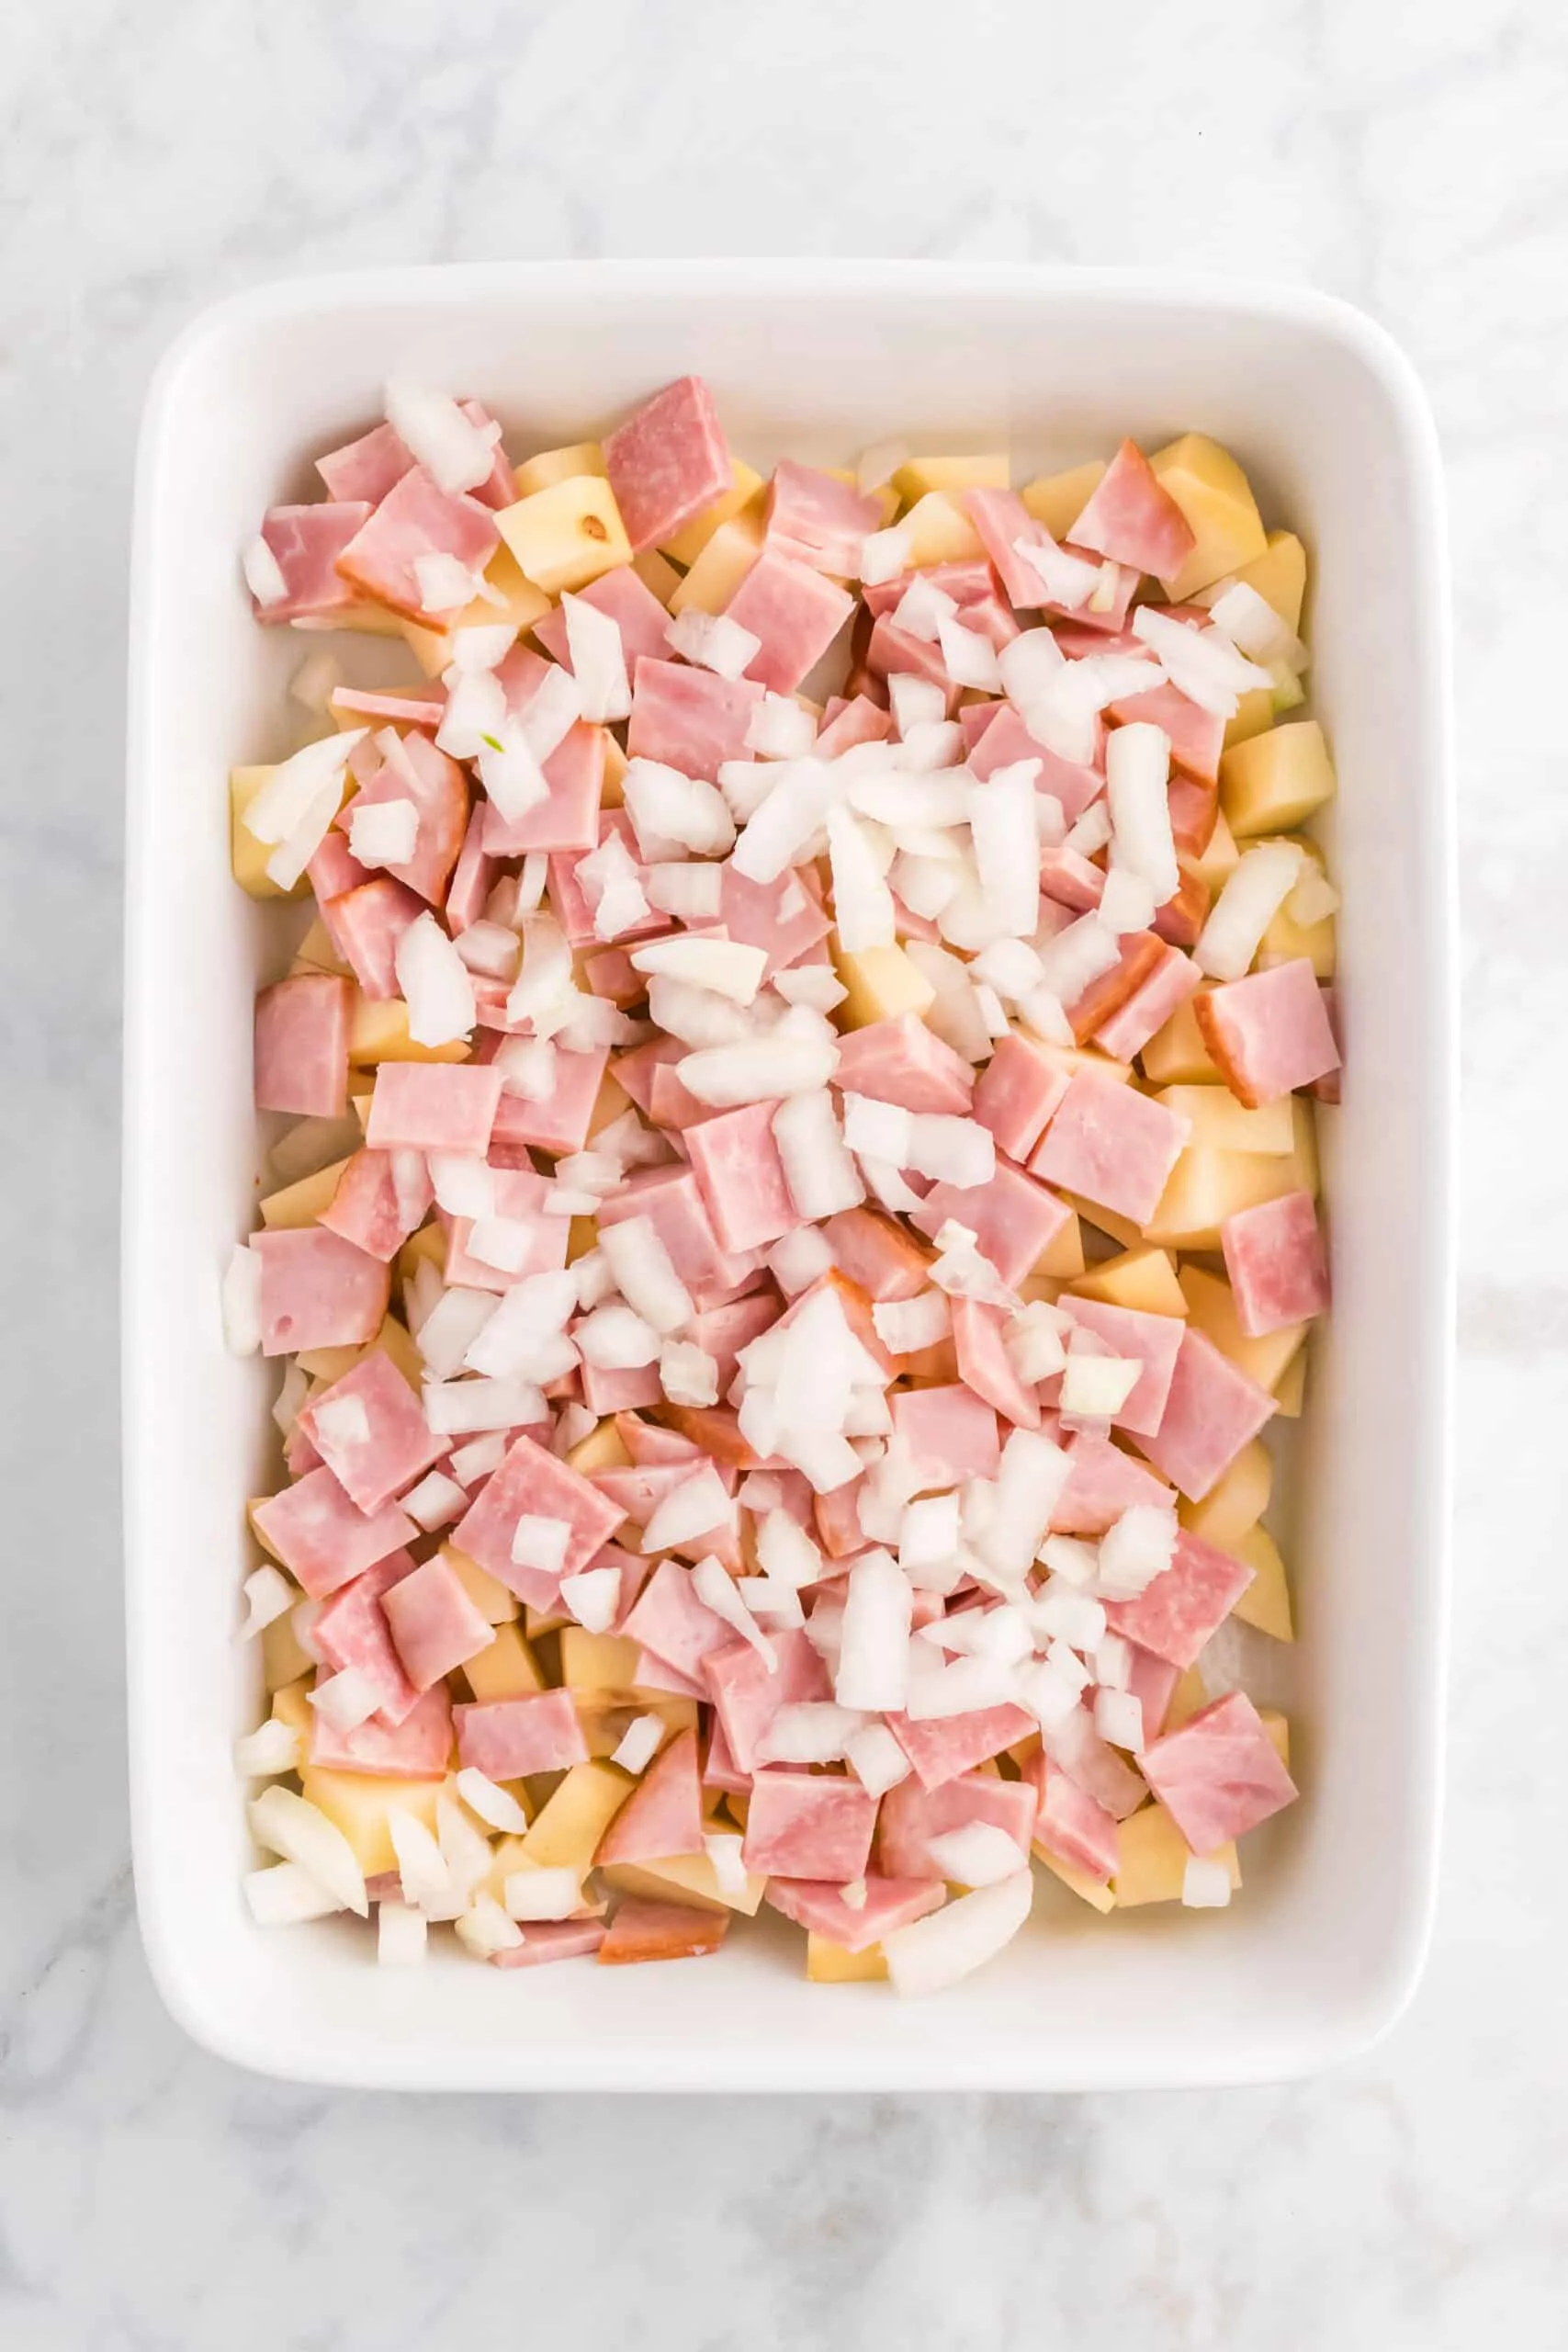 diced ham, potatoes and onions in a baking dish